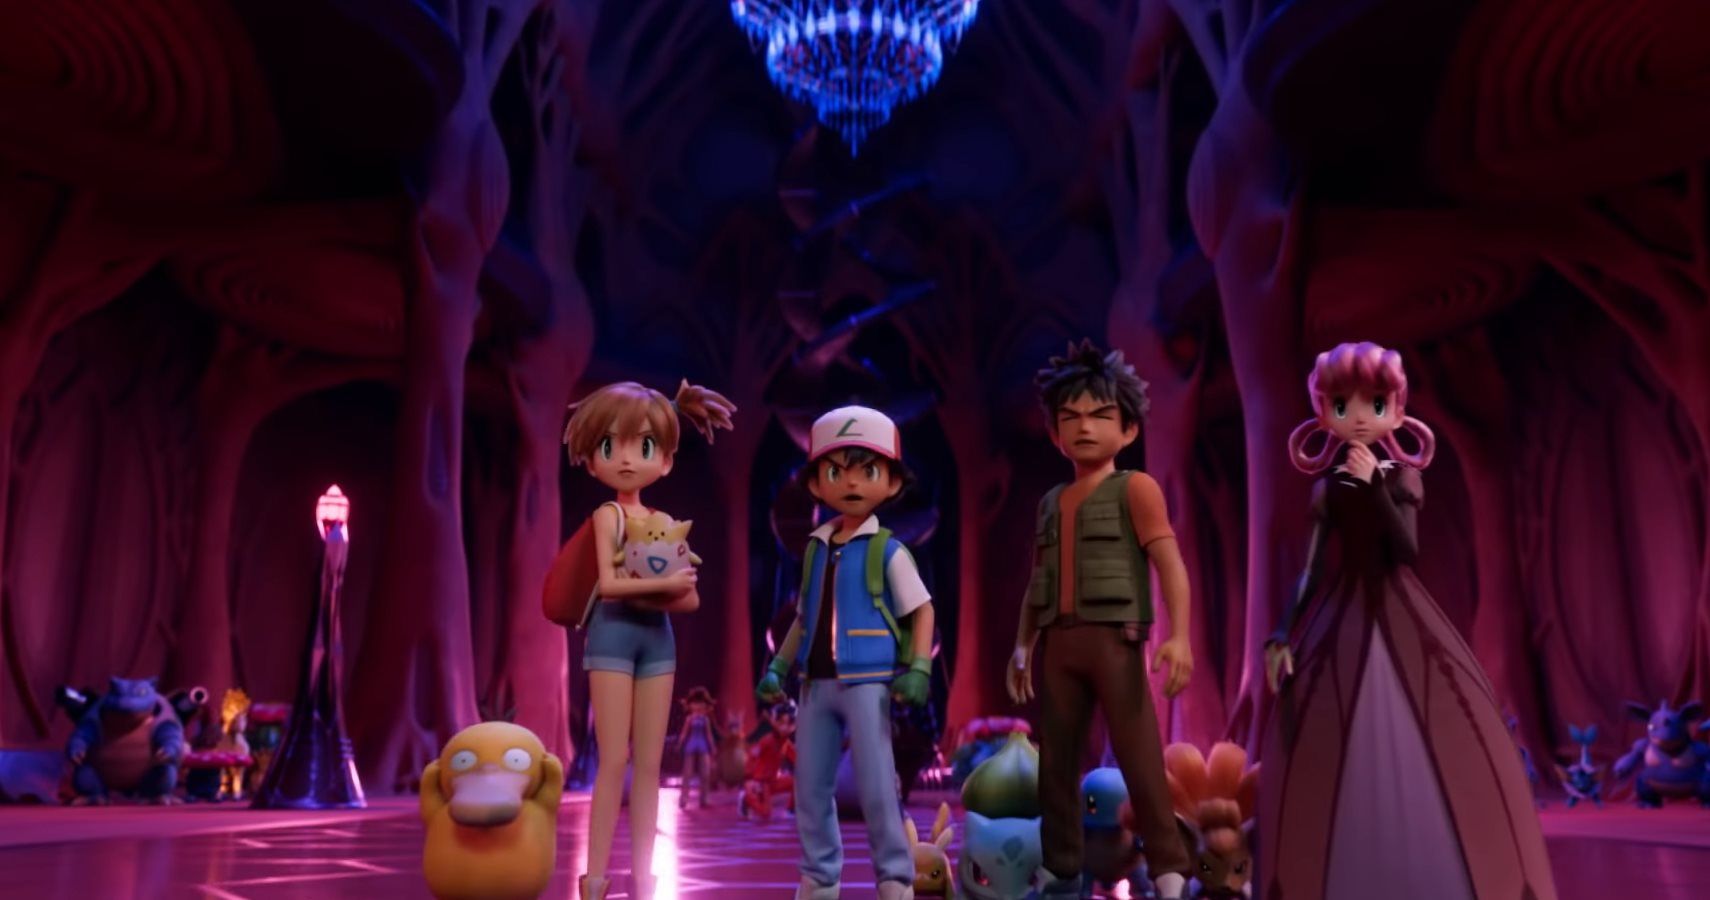 Ash Ketchum Gets The Full CGI Treatment No One Asked For In New Pokémon Movie Trailer